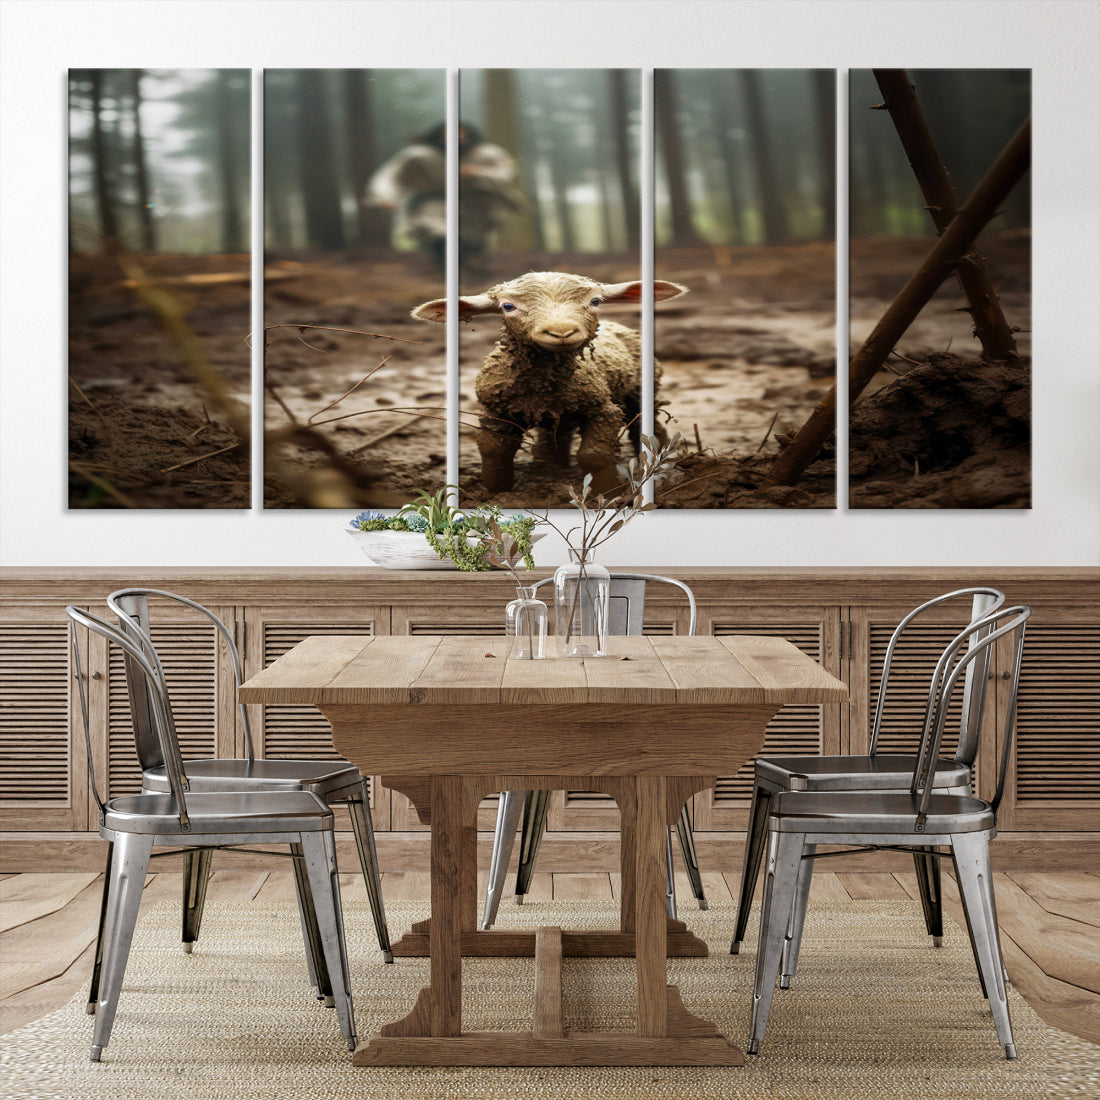 The Lost Lamb and The Shepherd Christian Wall Art Canvas Print Jesus Art Framed Printed